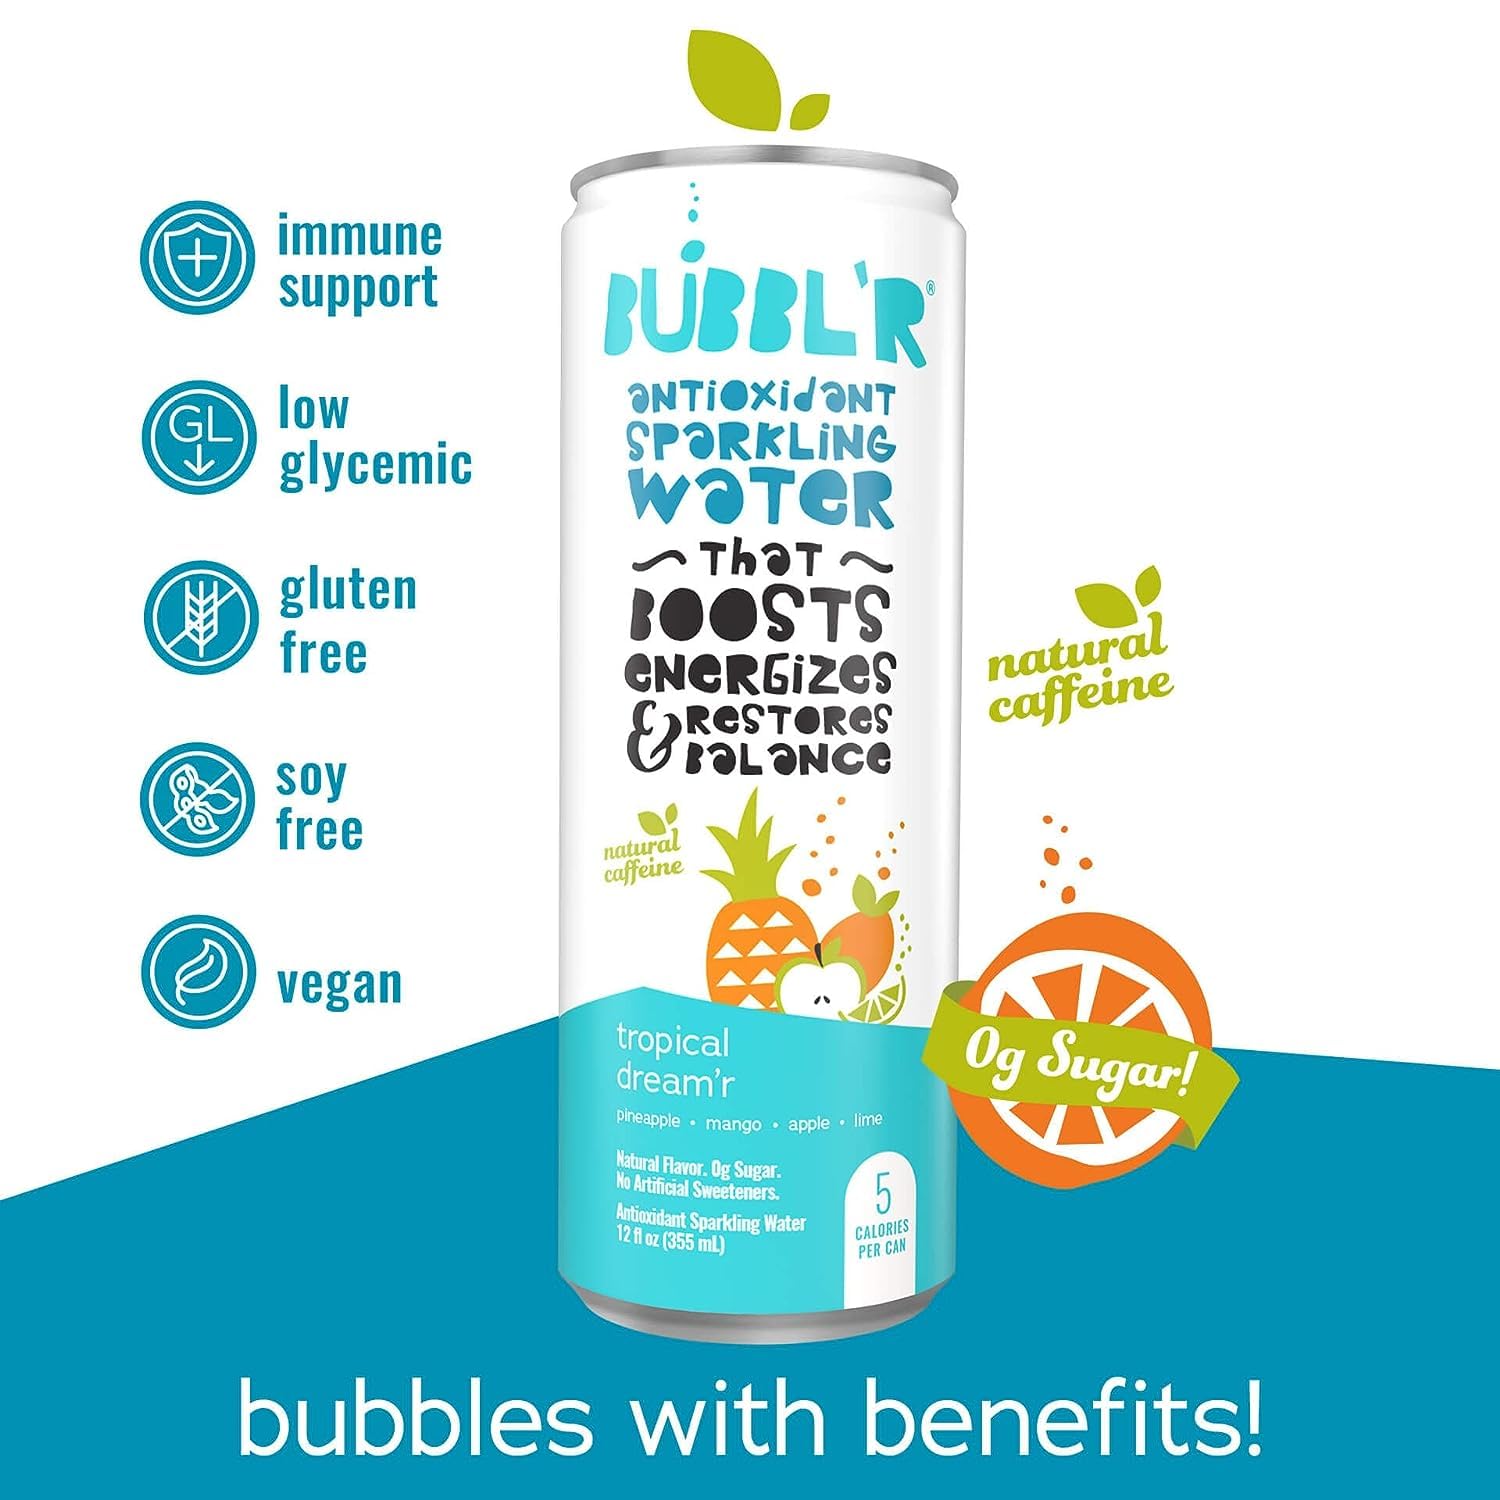 BUBBL'R tropical dream'r, Antioxidant Sparkling Water with Natural Caffeine, 0g Sugar, Gluten Free, All Natural Flavors, 12 Fl Oz Cans, 12 Count